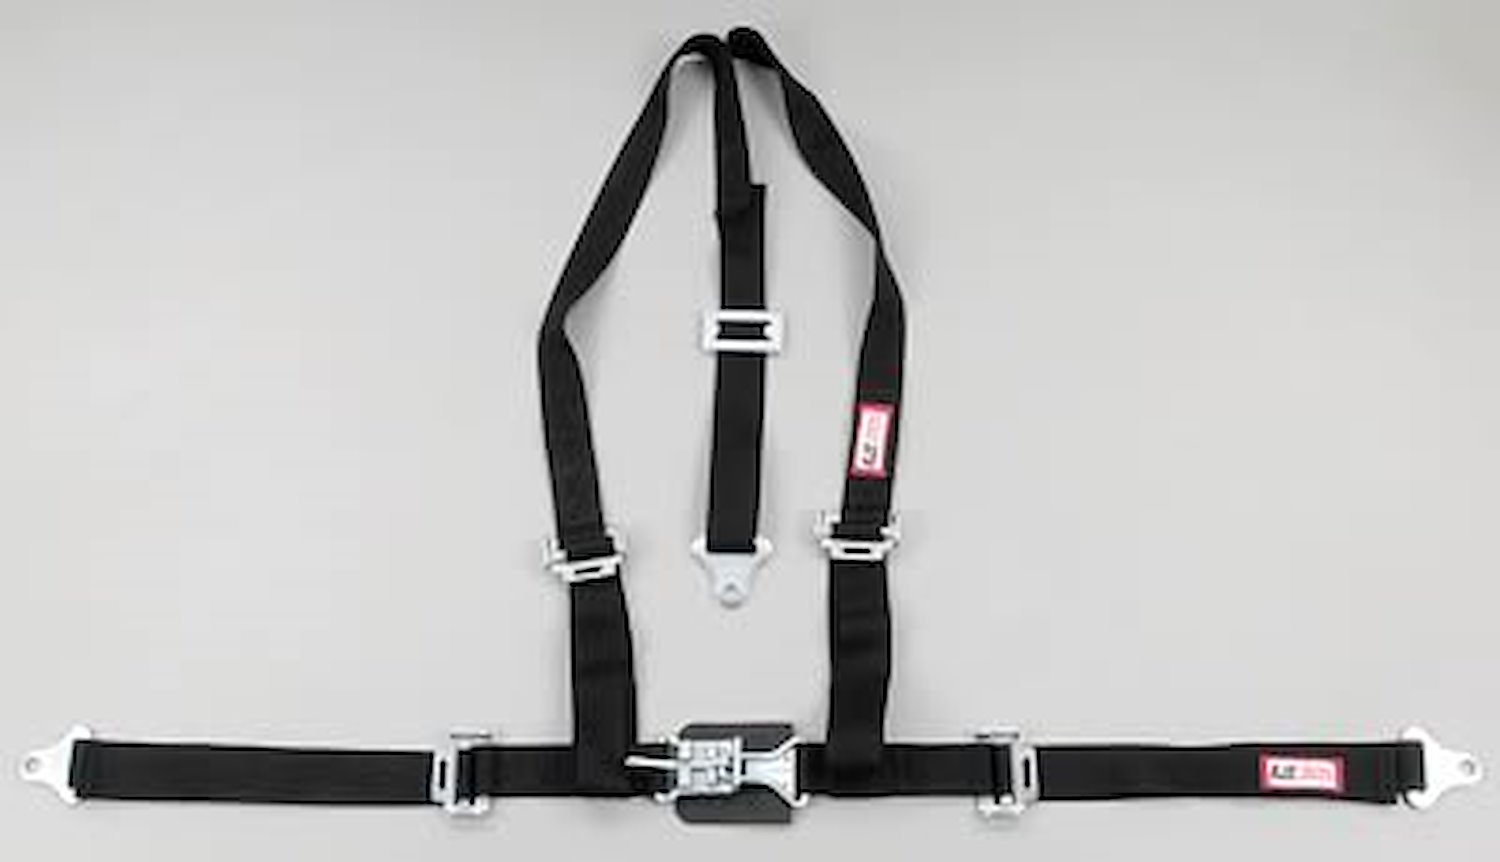 NON-SFI L&L HARNESS 2 PULL UP Lap Belt SEWN IN 2 S.H. Y FLOOR Mount ALL WRAP ENDS BLUE